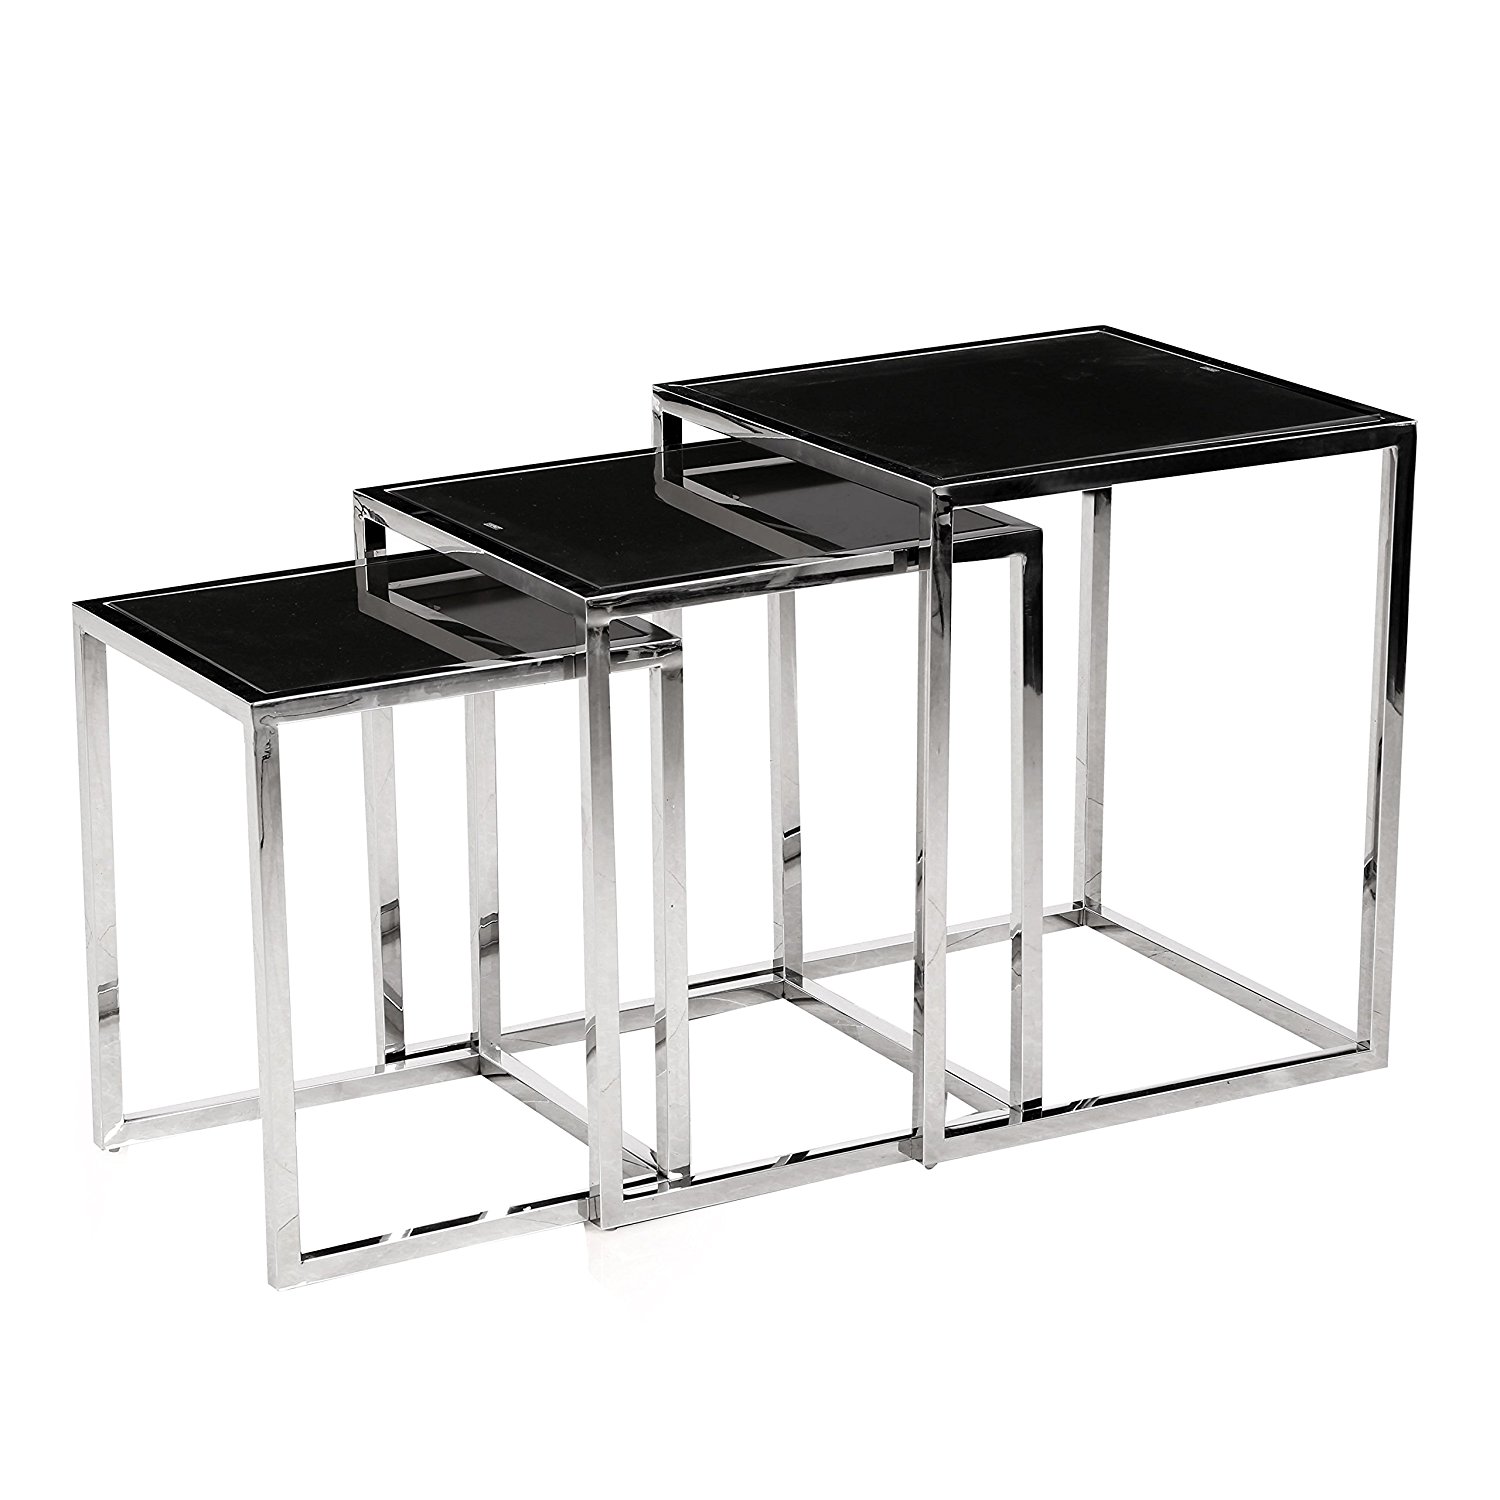 Bella Esprit Chrome Metal 3-piece Nesting Table with Black Glass Tops